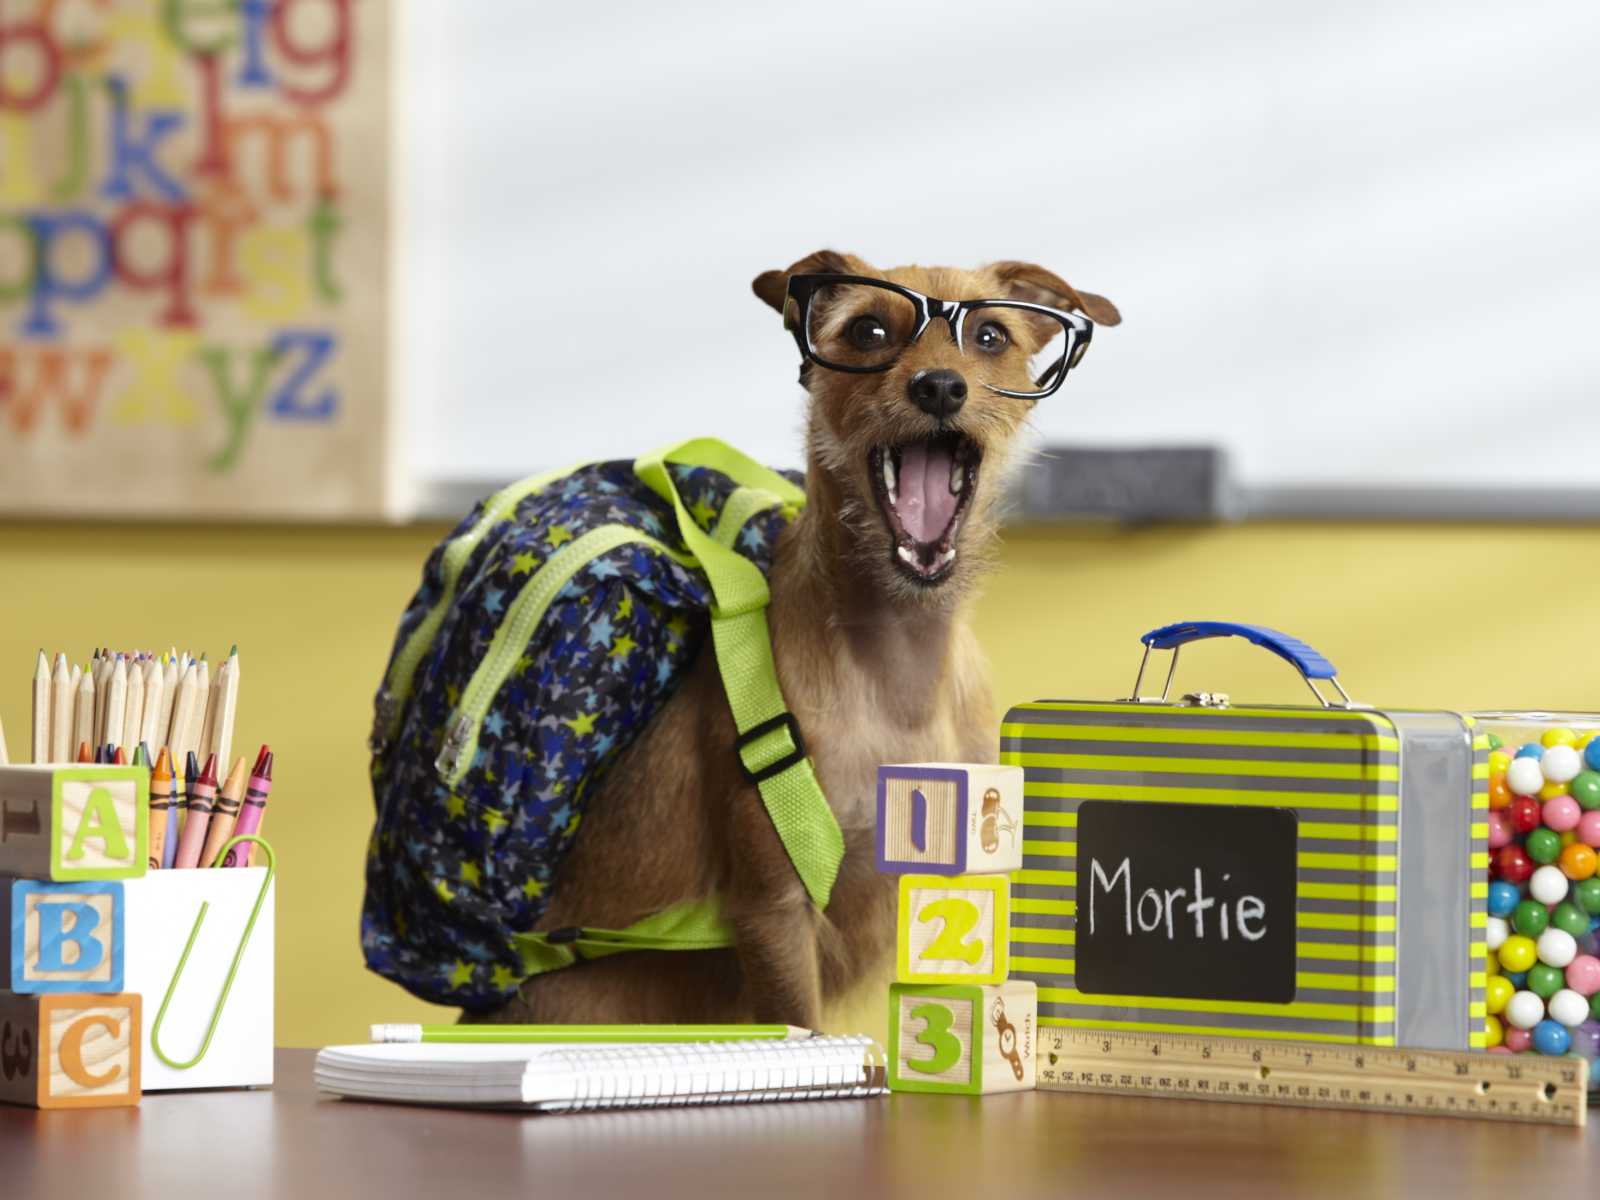 dog with glasses and backpack on sitting on classroom desk with lunchbox saying, "mortie" next to pencils and crayons